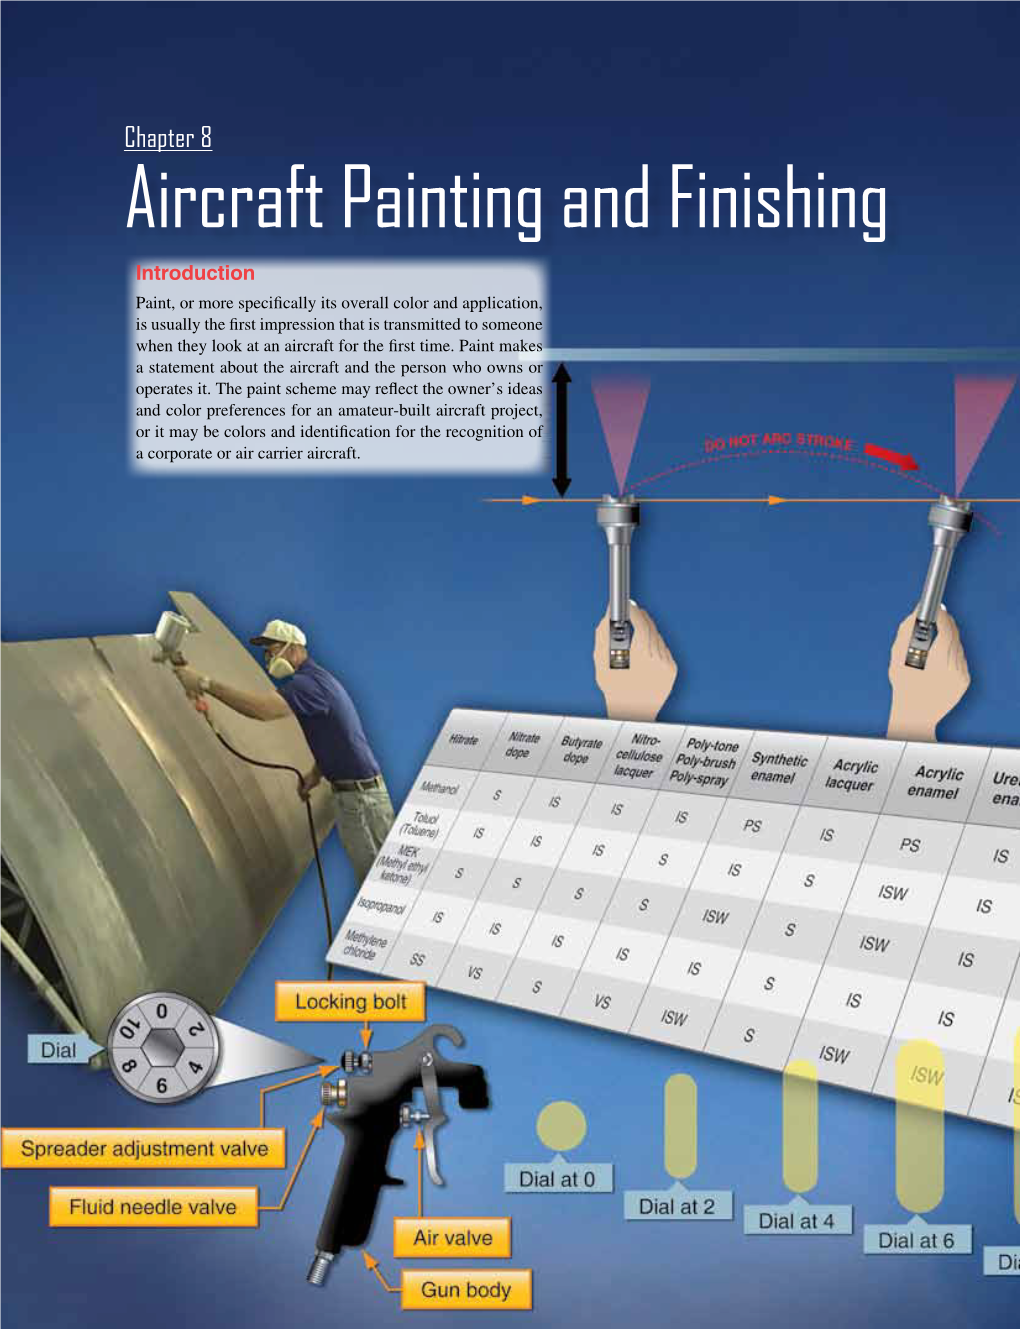 Aircraft Painting and Finishing